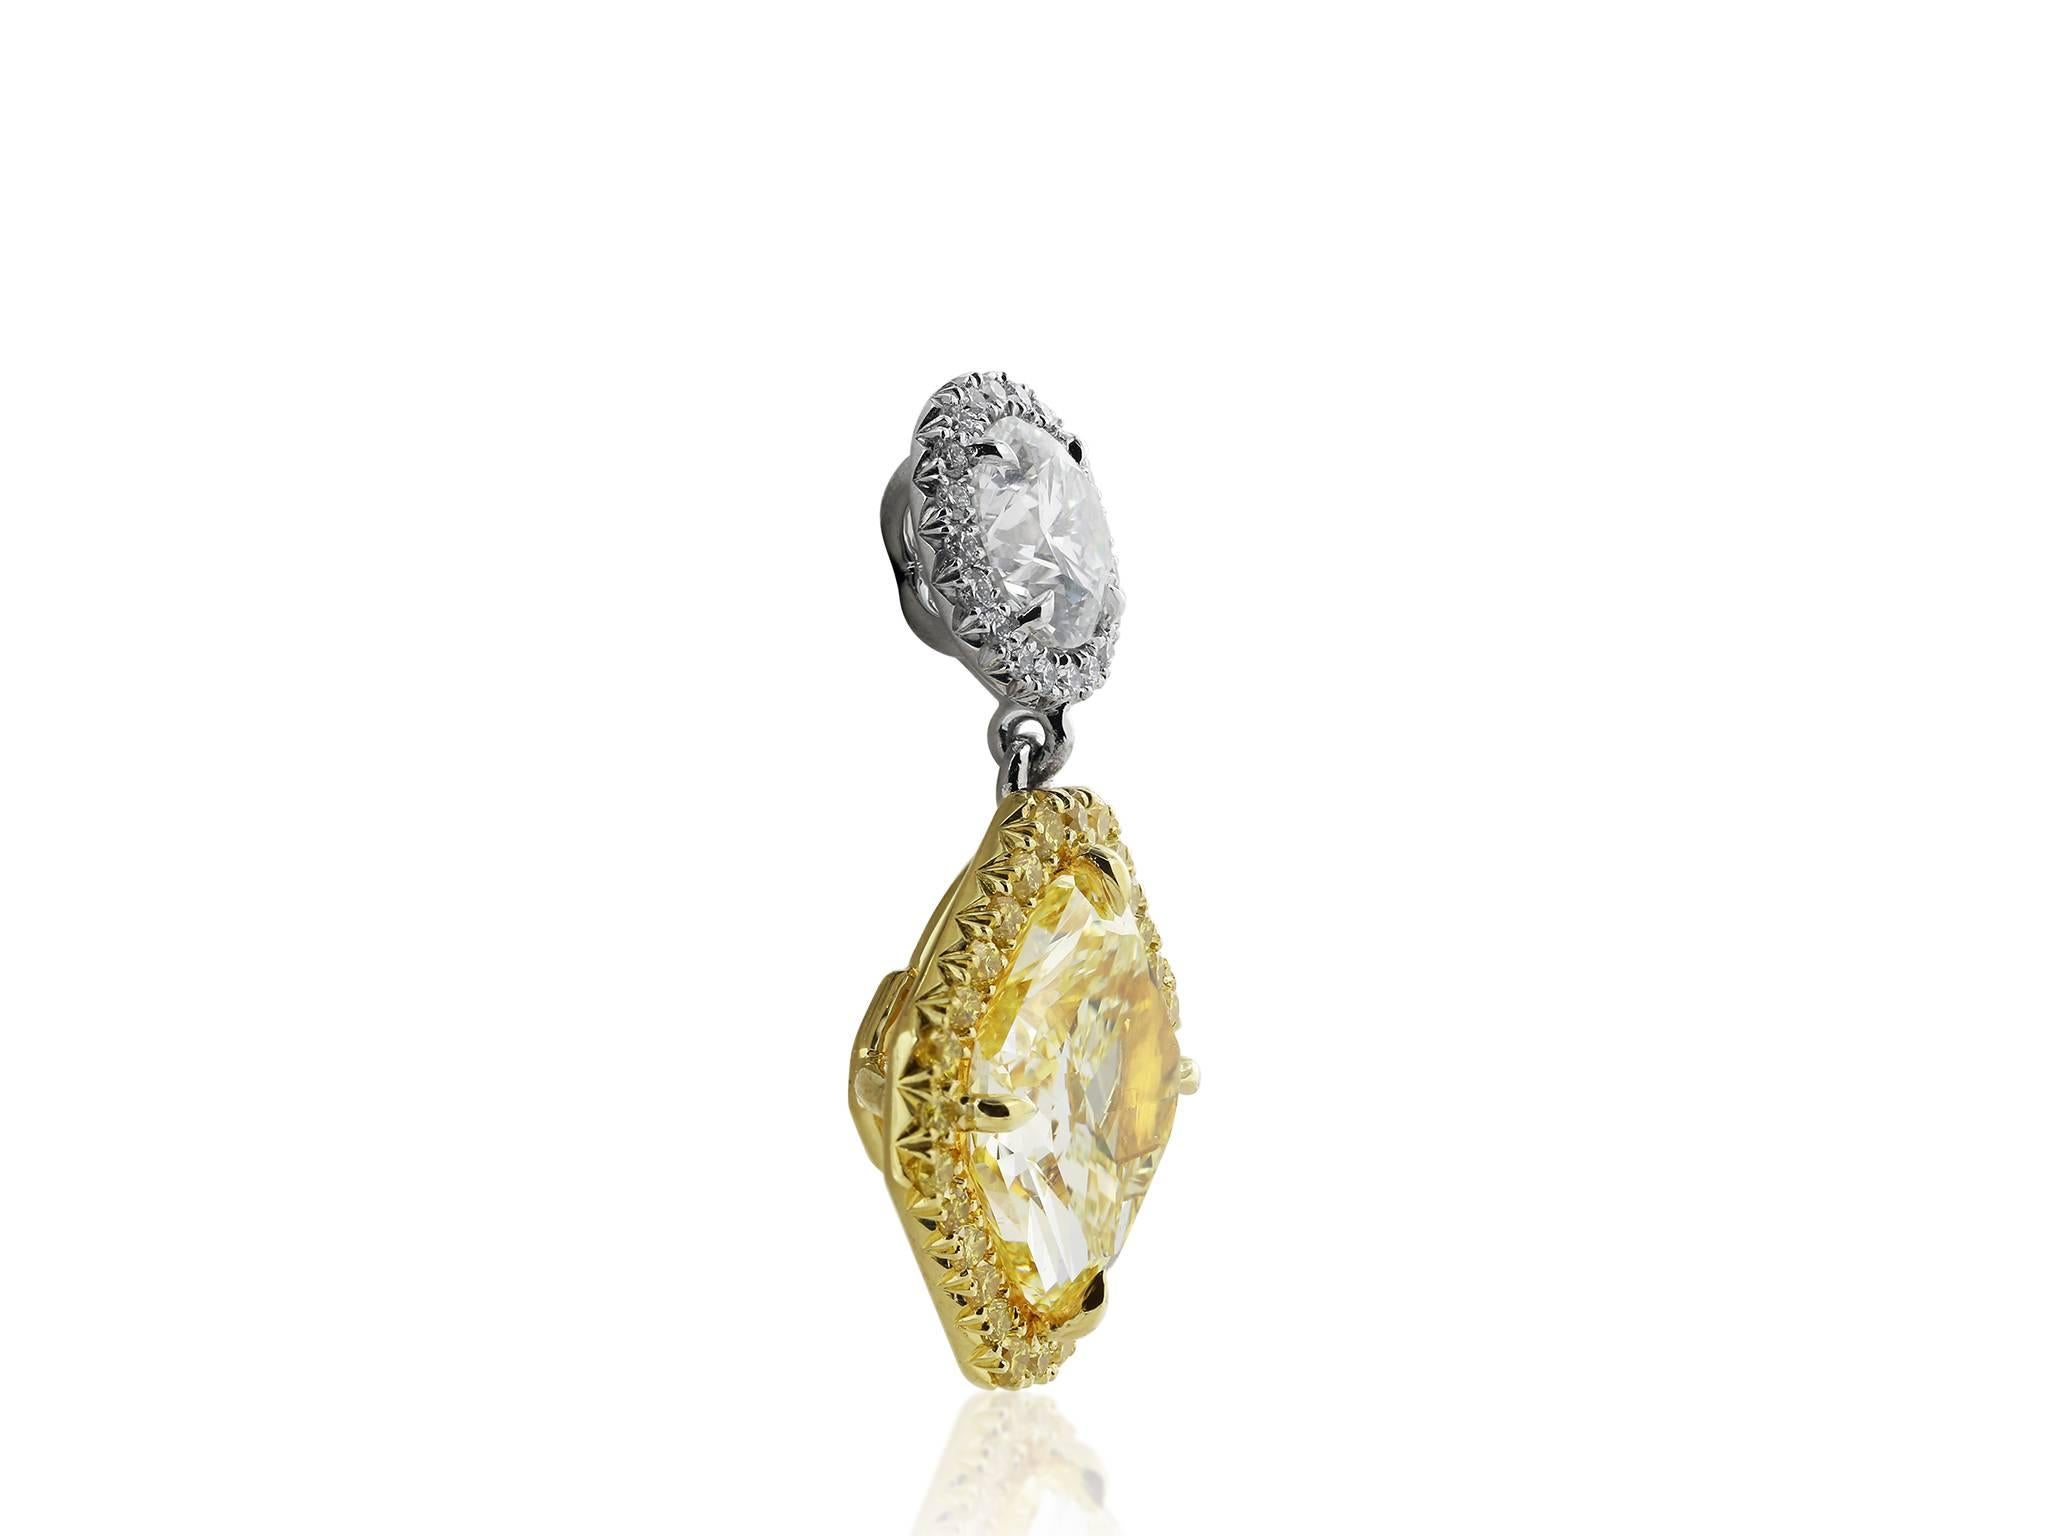 Platinum and 18 karat yellow gold drop earrings consisting of 1 radiant cut canary diamond weighing 2.67 carats with GIA color only certificate #10733383, and 1 radiant cut canary diamond weighing 2.72 carats with GIA certificate #10853435. The